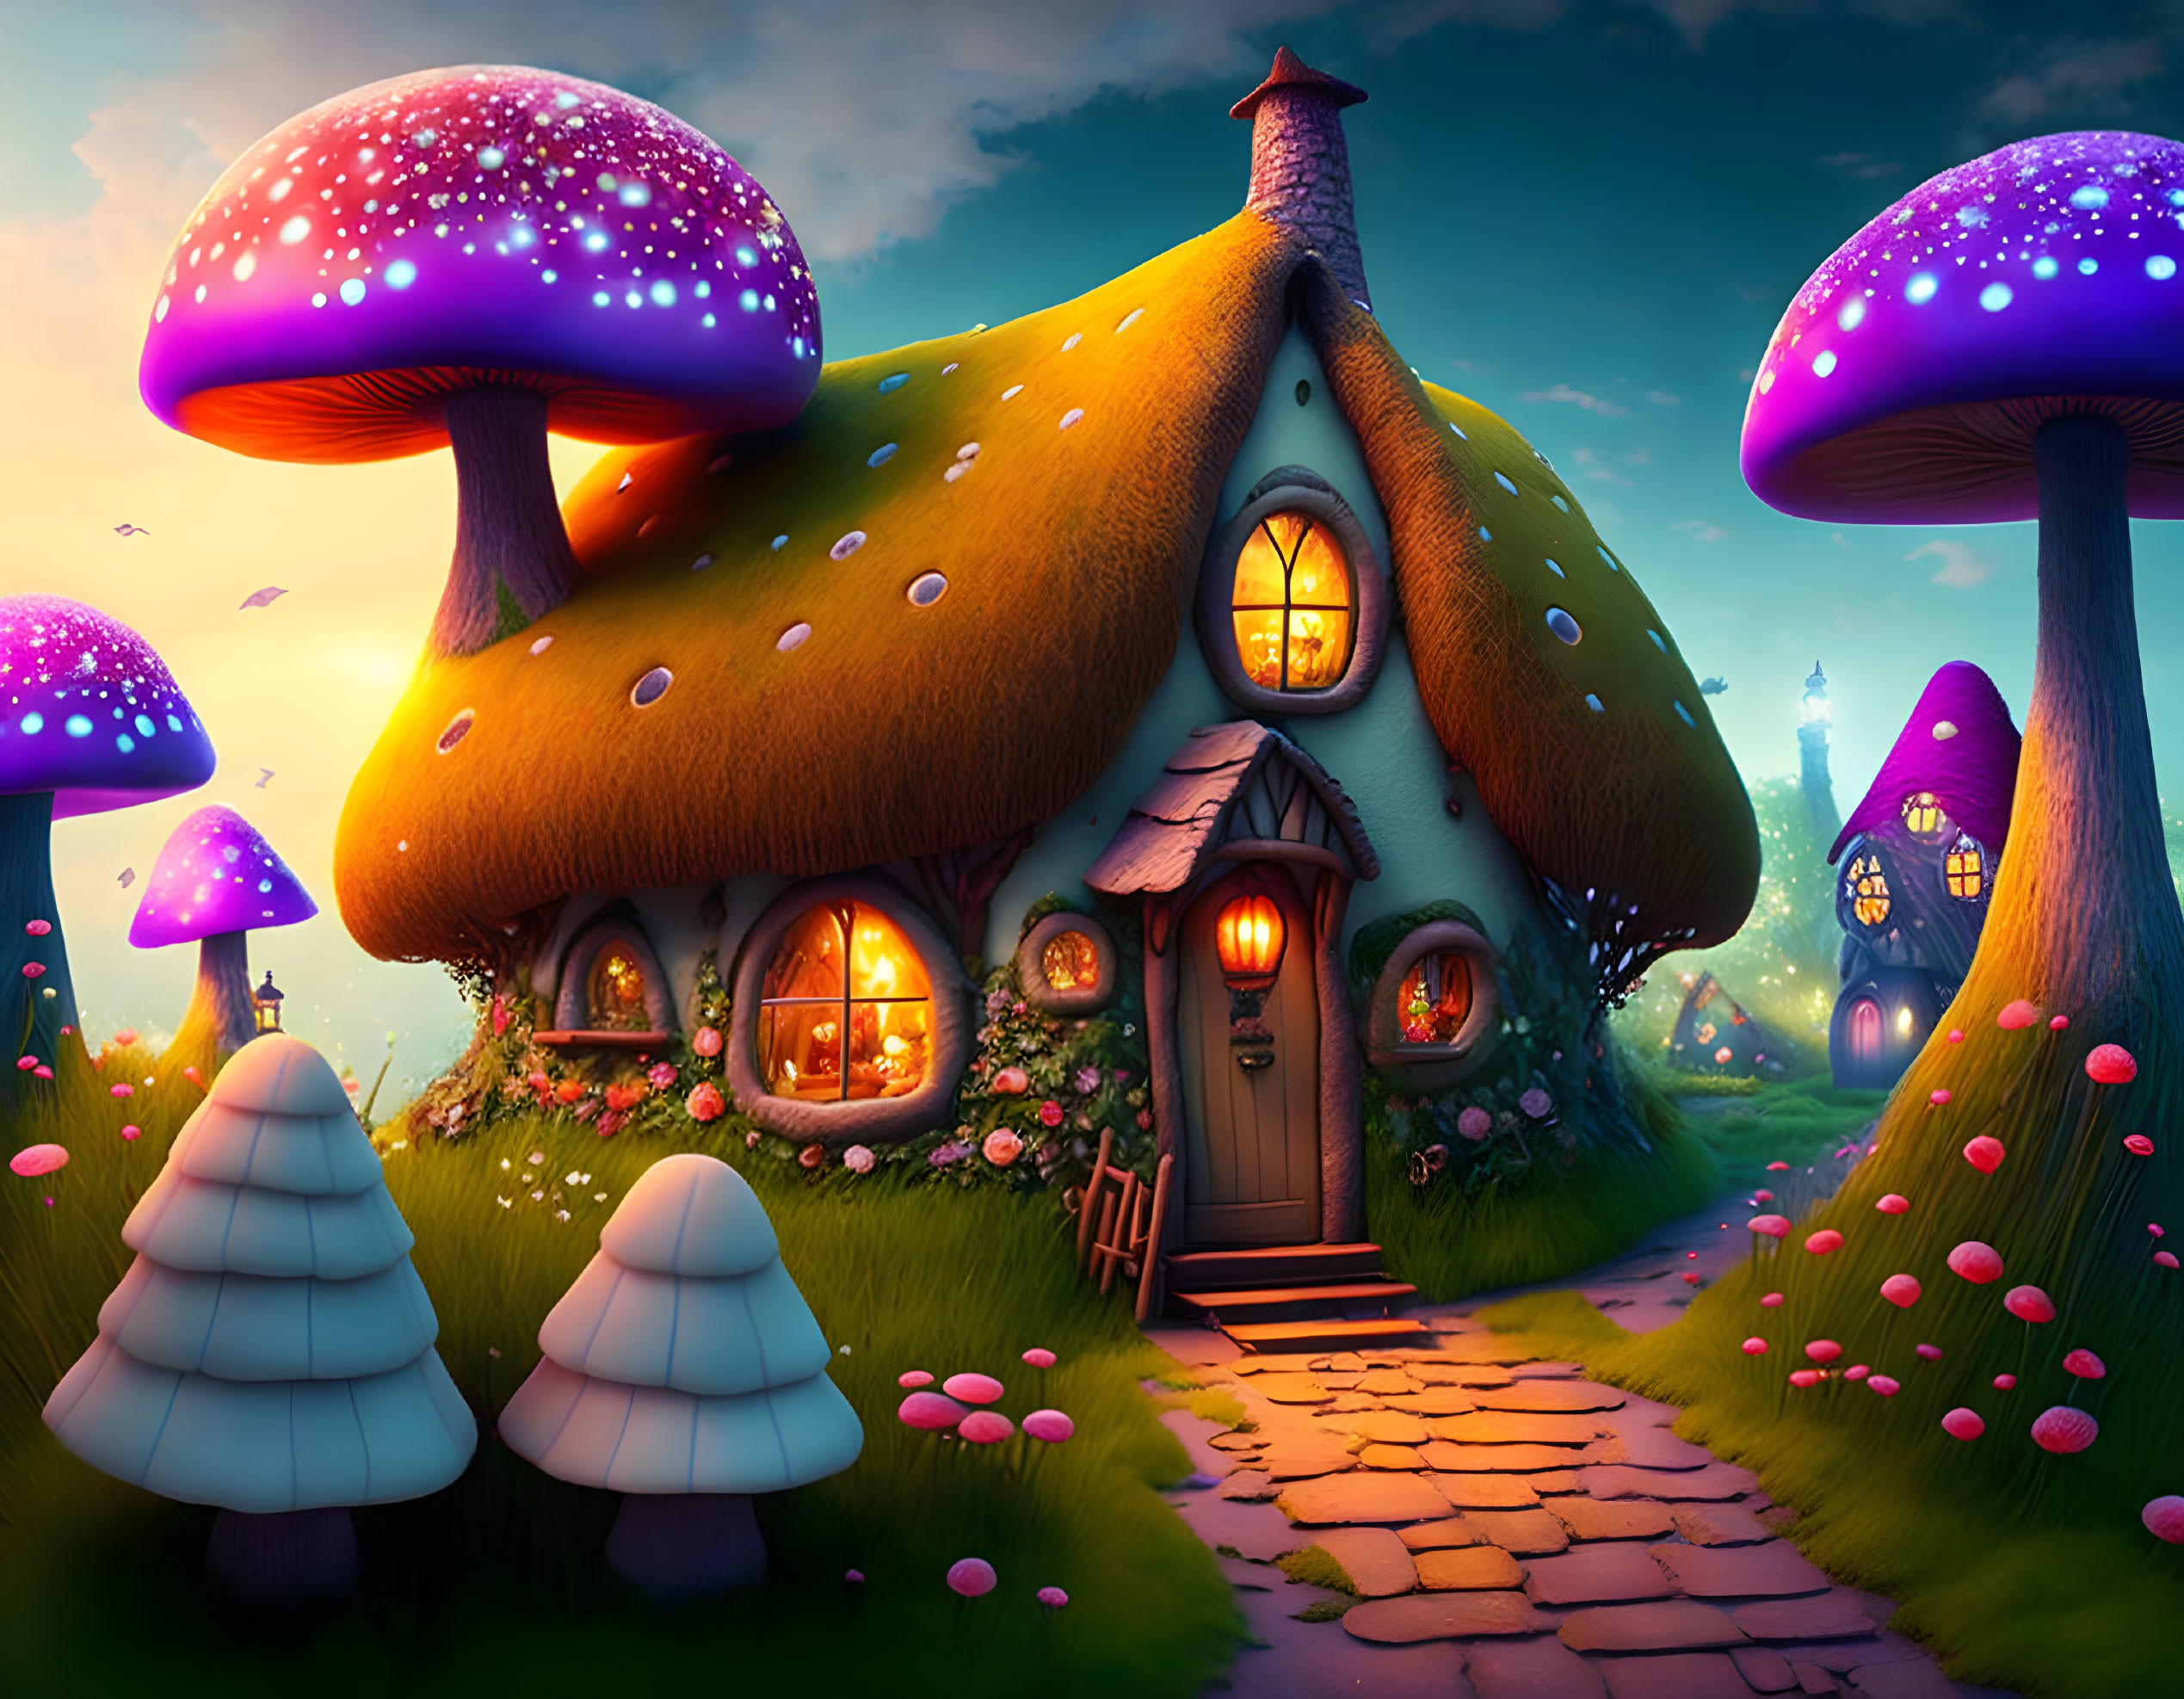 Fantasy landscape with glowing mushroom house and luminescent mushrooms at dusk